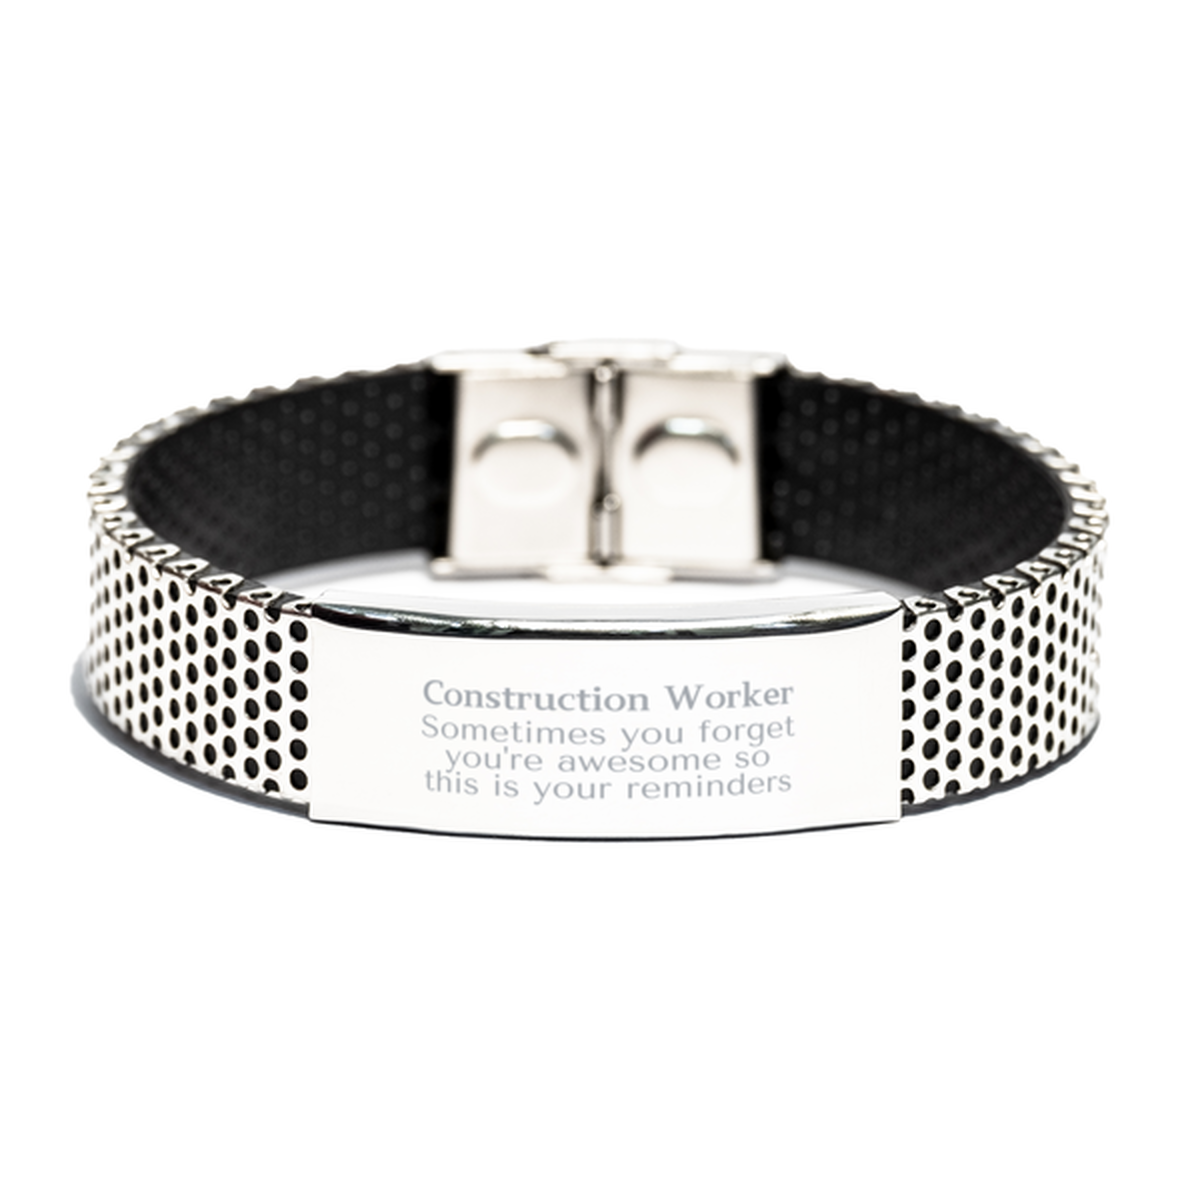 Sentimental Construction Worker Stainless Steel Bracelet, Construction Worker Sometimes you forget you're awesome so this is your reminders, Graduation Christmas Birthday Gifts for Construction Worker, Men, Women, Coworkers